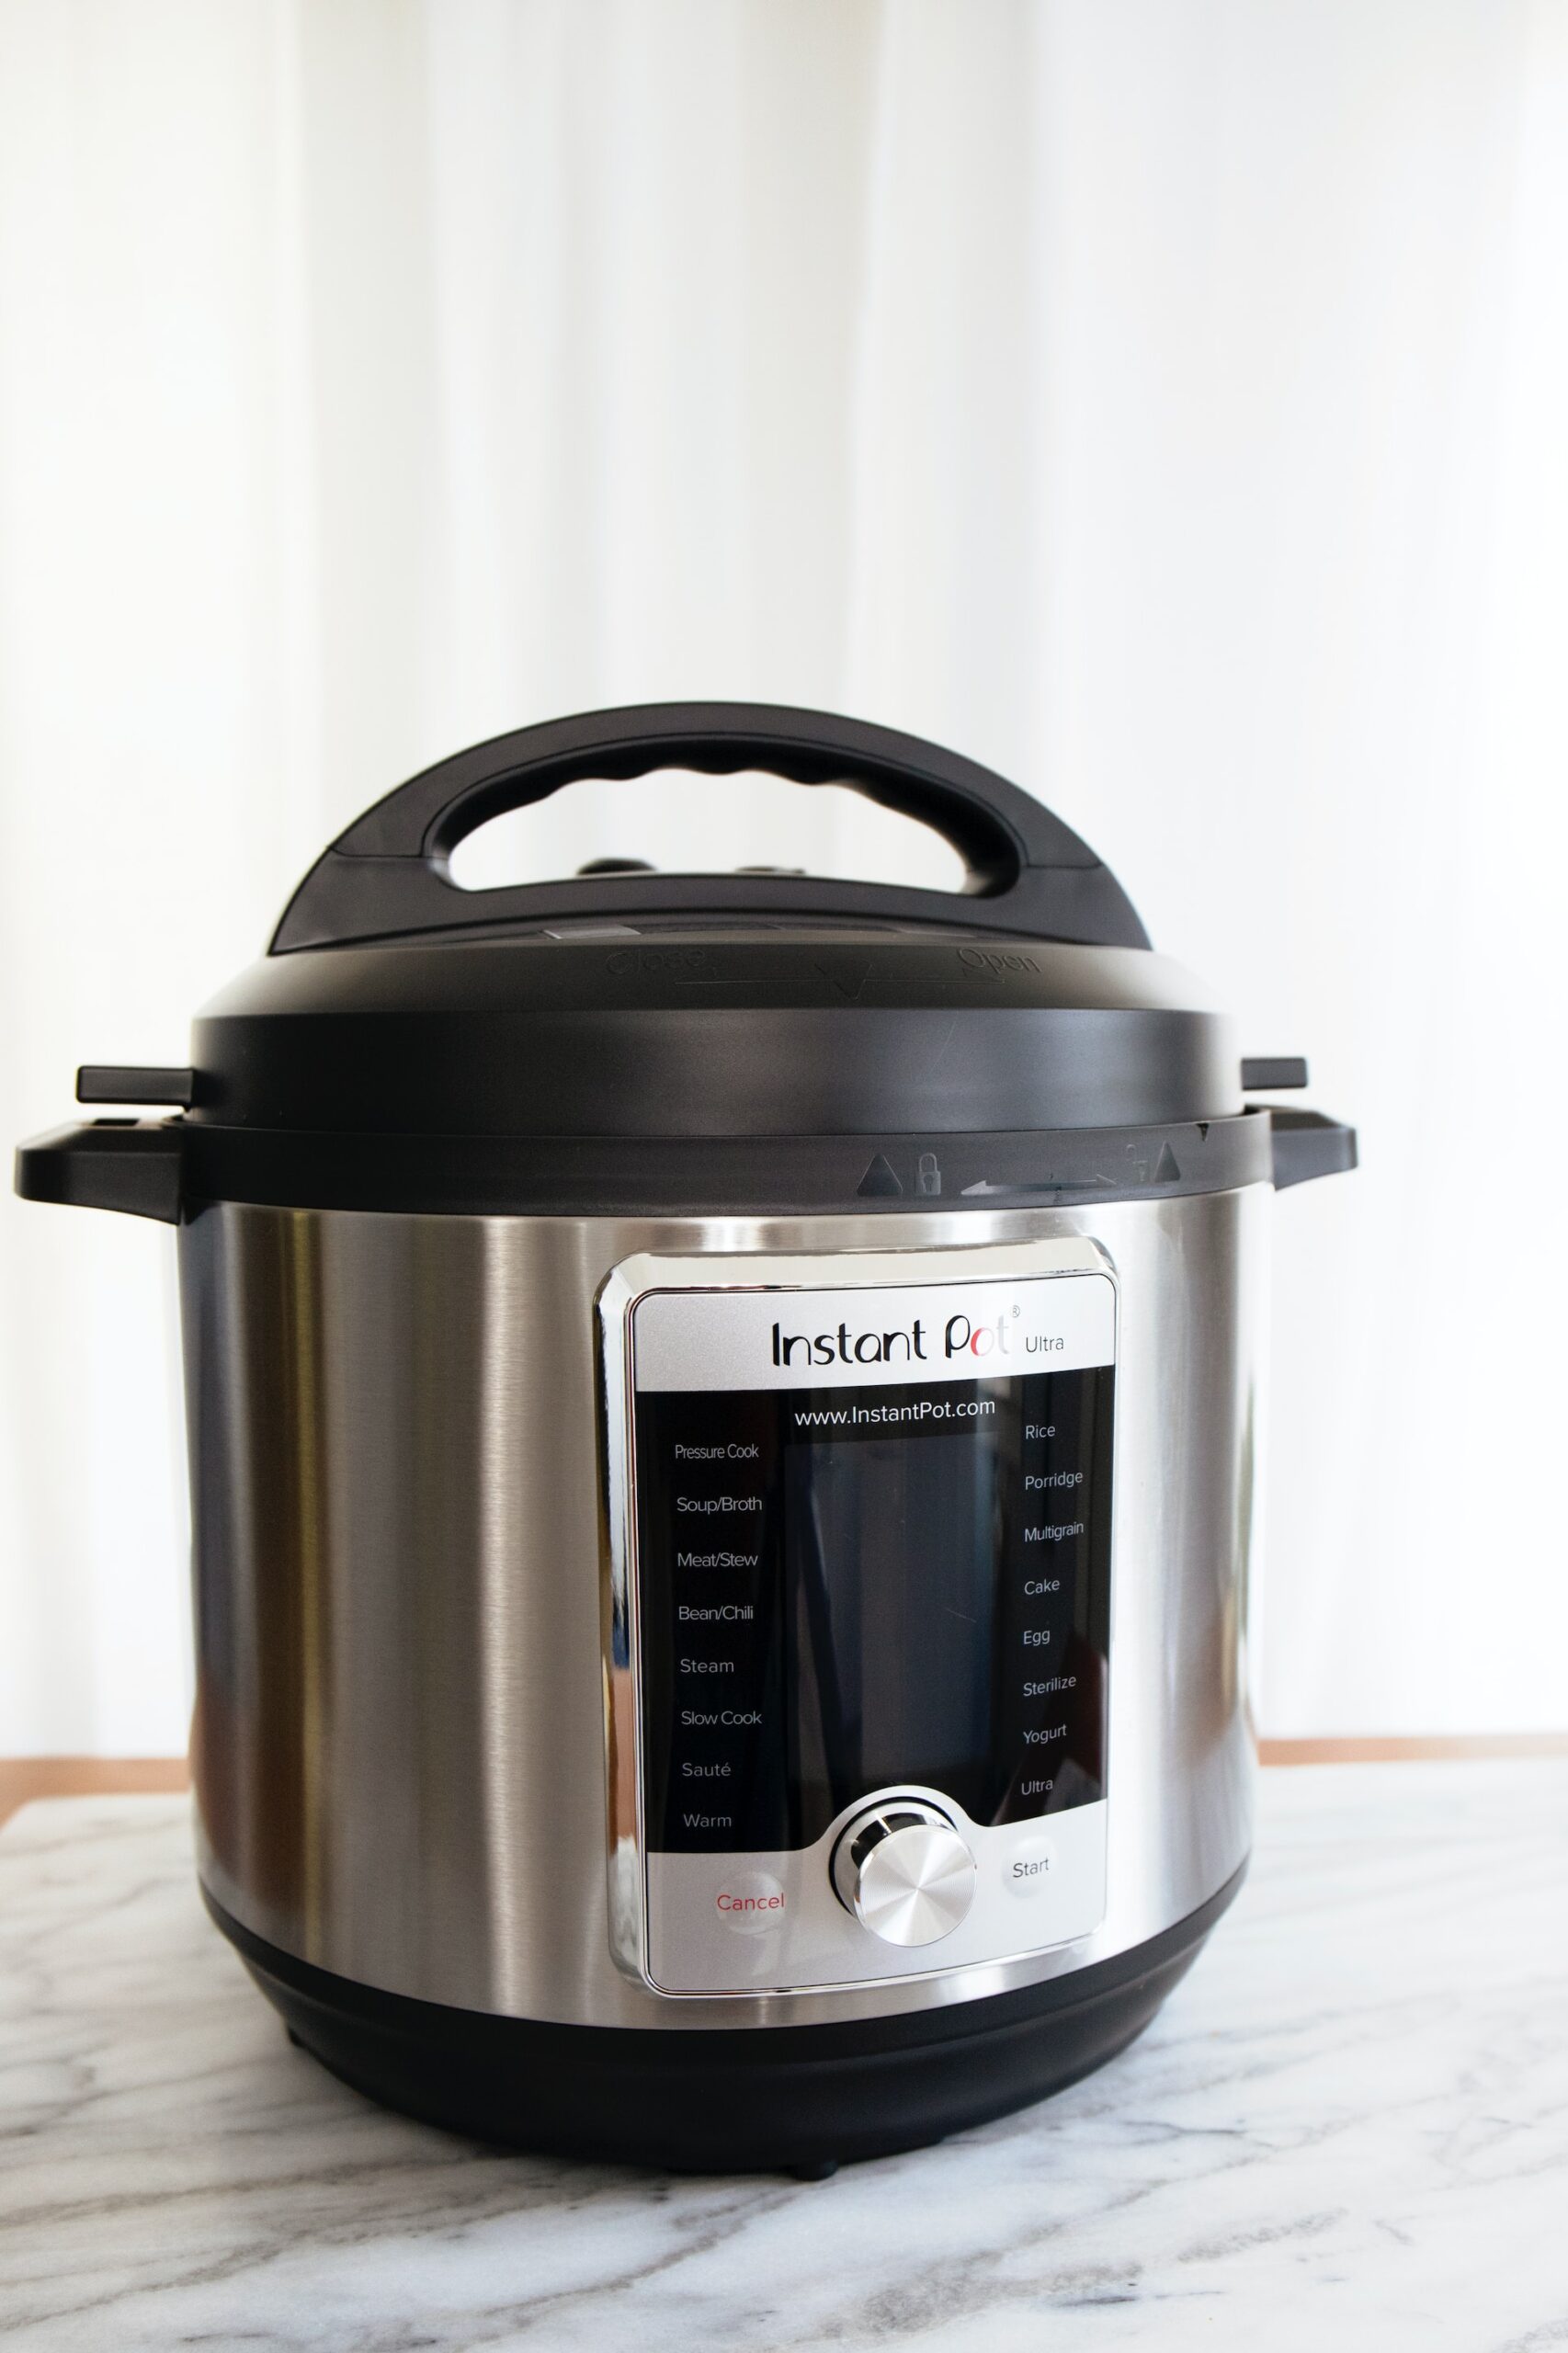 Instant Pot Cooking Times Cheat Sheet [Free Download]